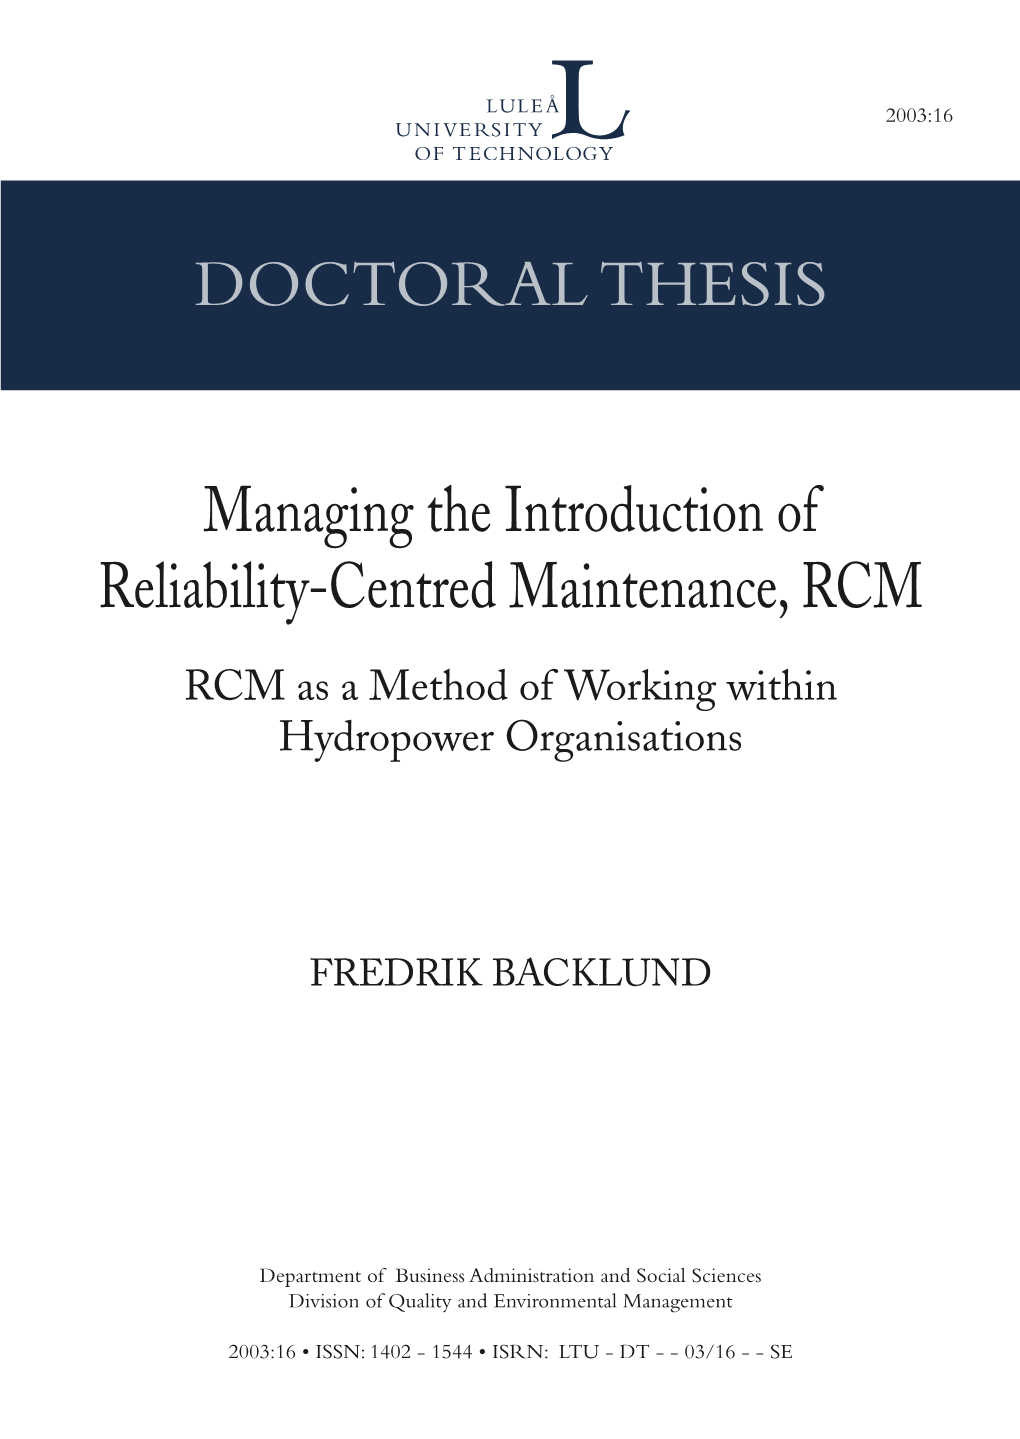 Managing the Introduction of Reliability-Centred Maintenance, RCM